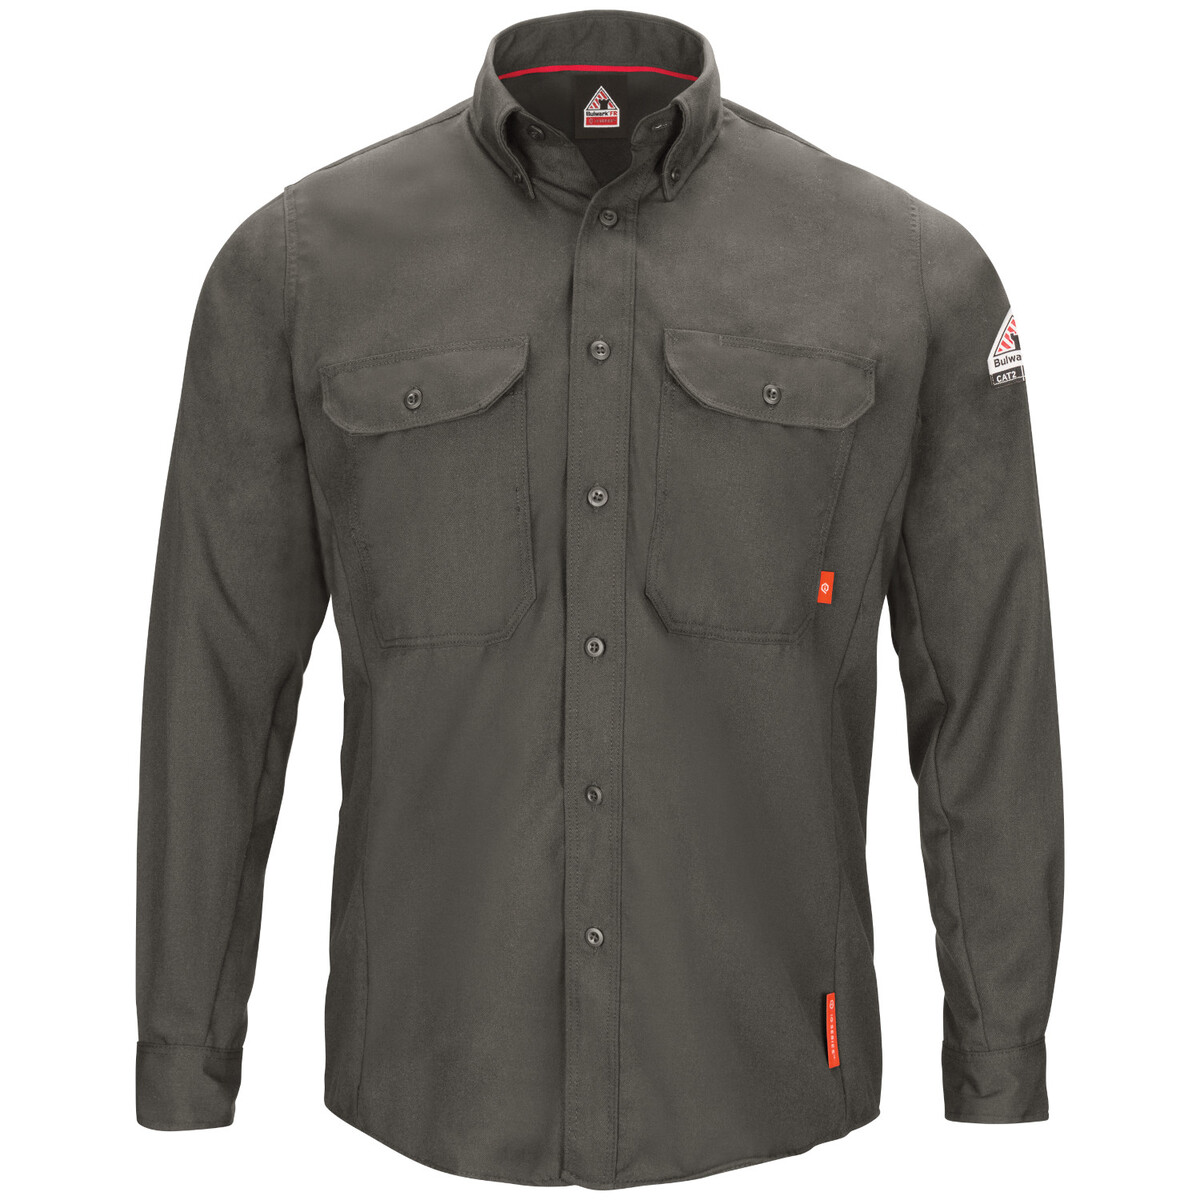 Bulwark® Medium Regular Dark Gray TenCate Evolv™ IQ SERIES® Lightweight Flame Resistant Shirt With Button Front Closure And Inse